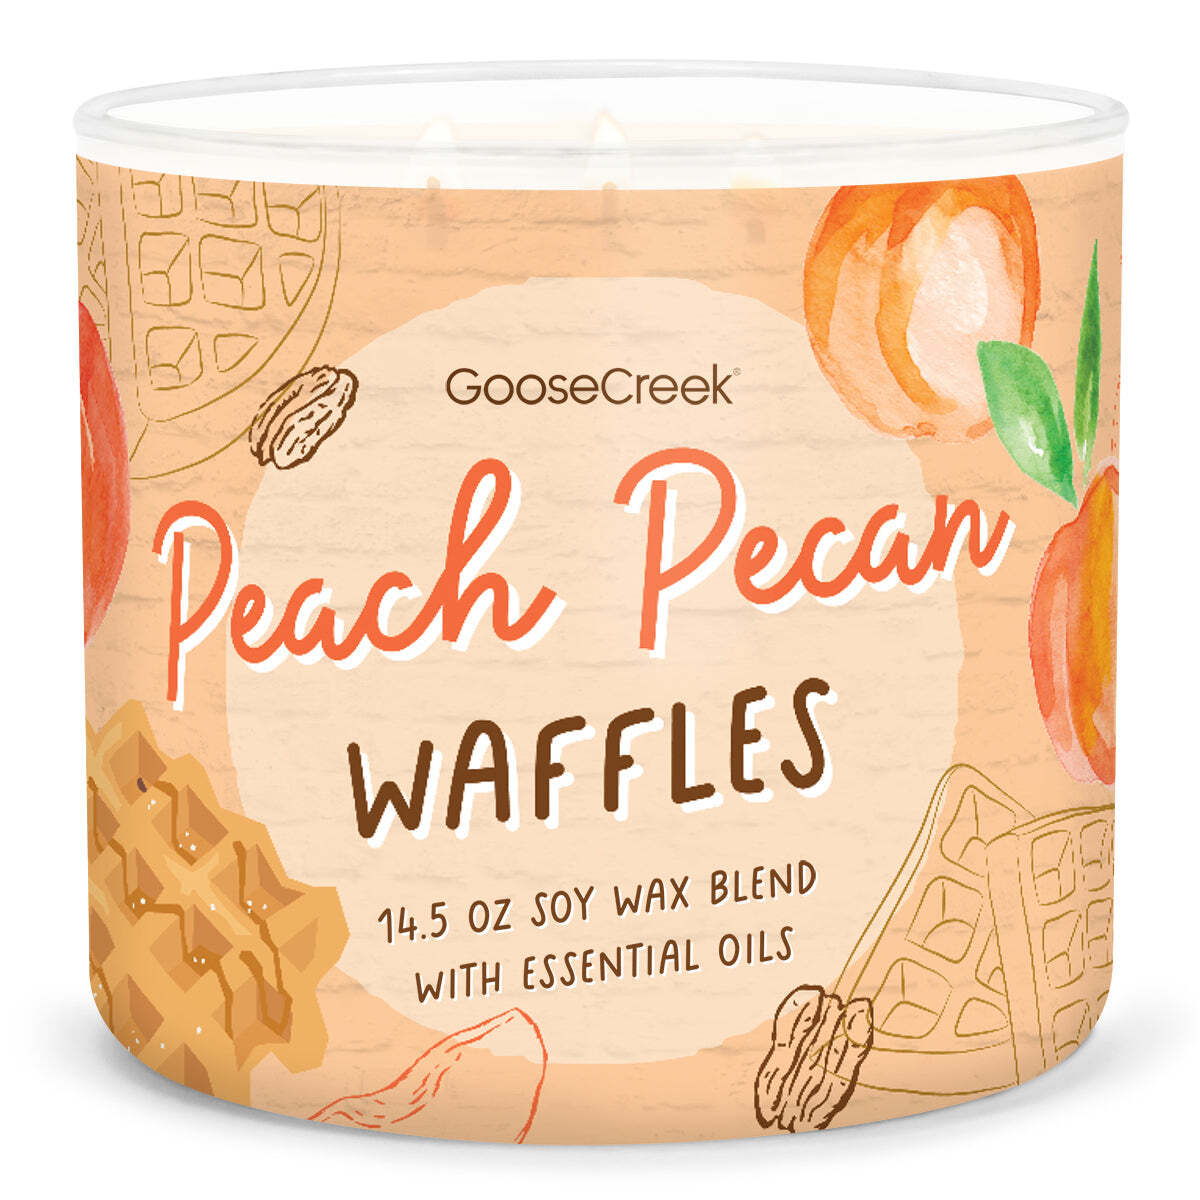 Peach Pecan Waffles Large 3-Wick Candle